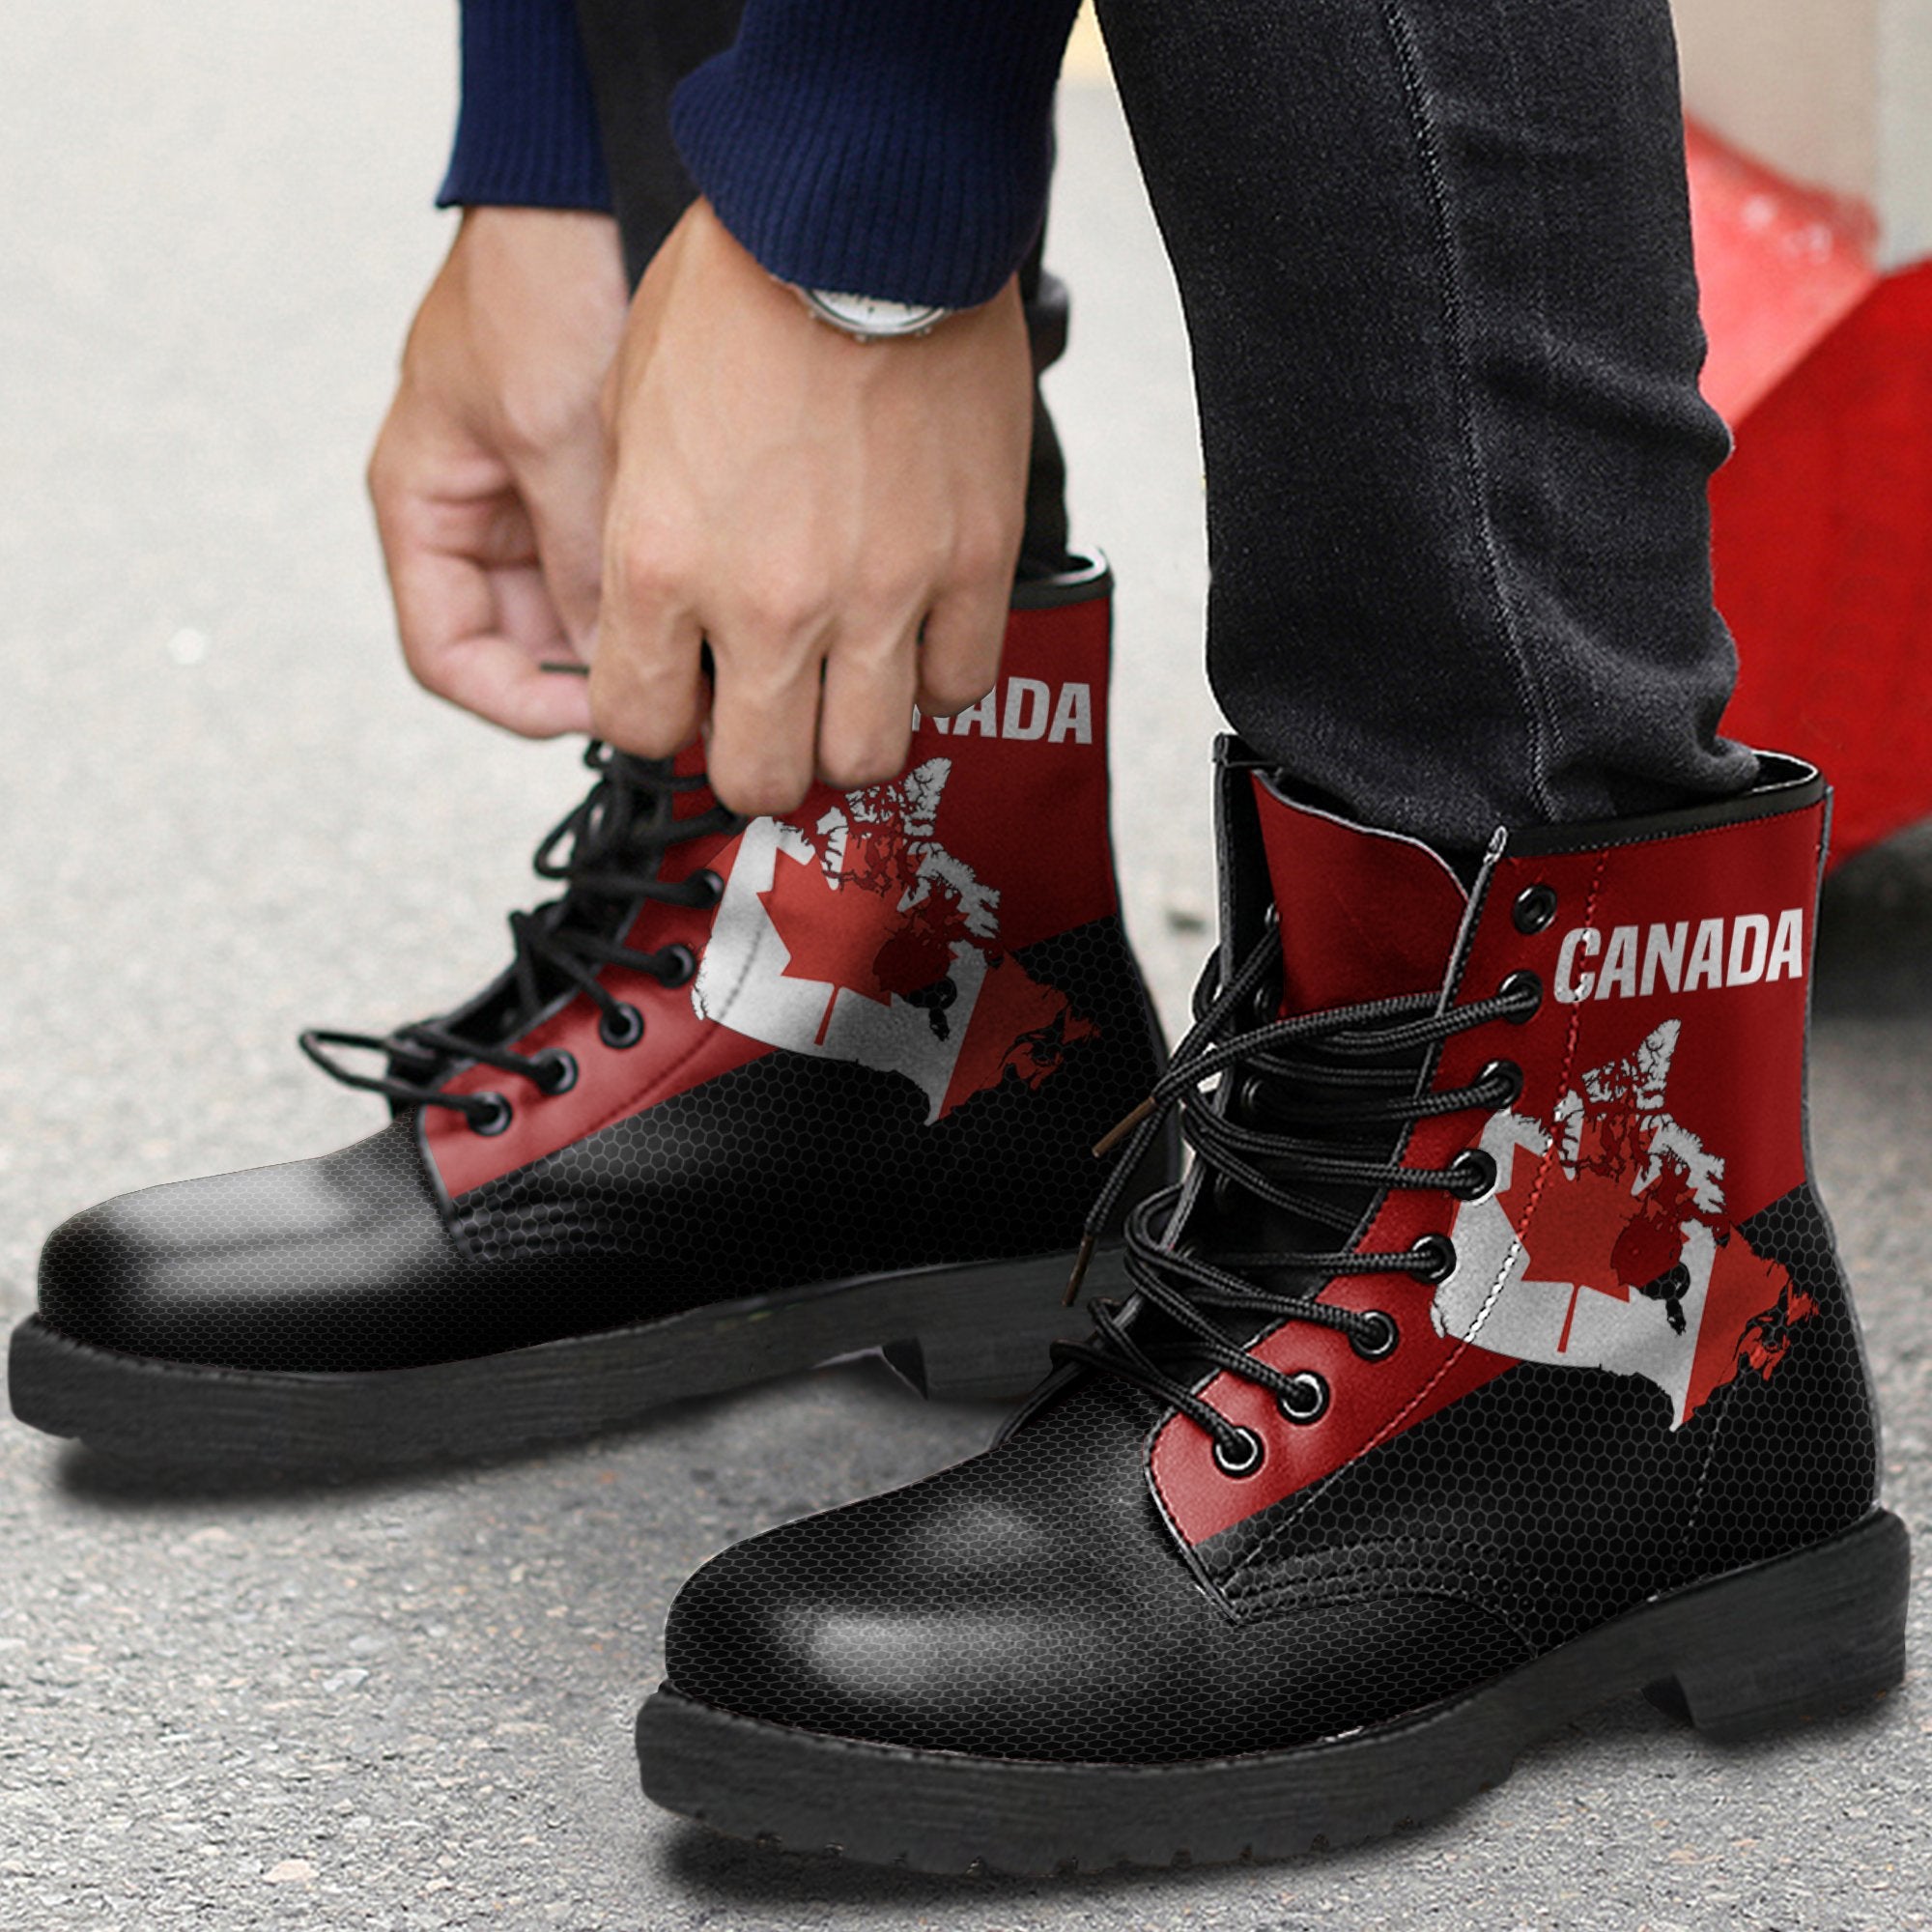 canada-map-special-leather-boots